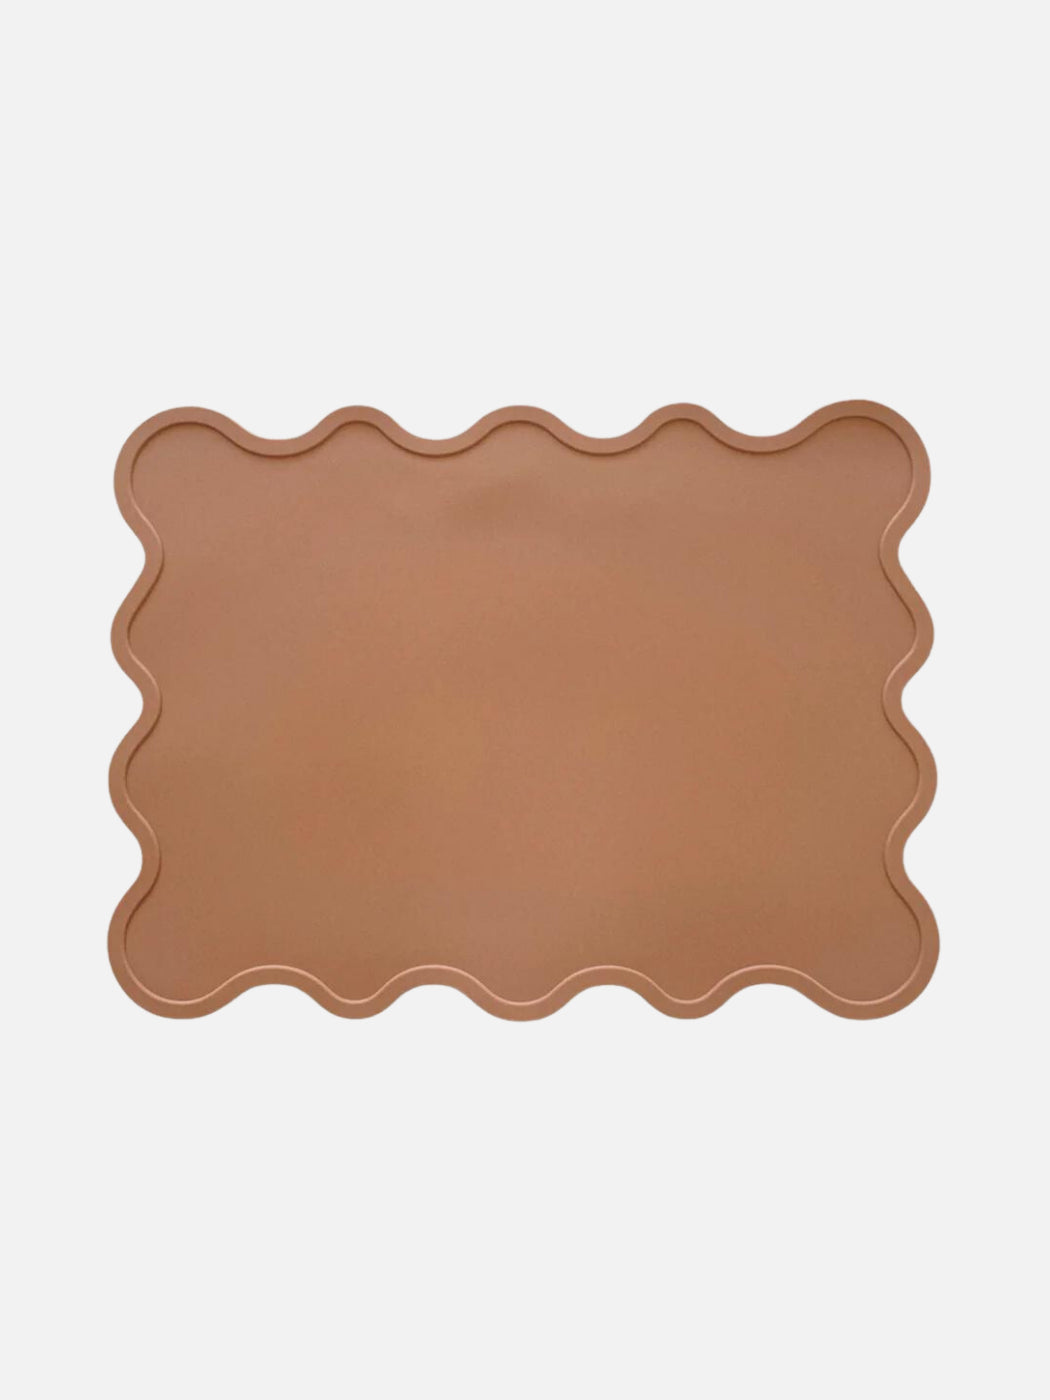 Wiggle Placemat - Cinnamon